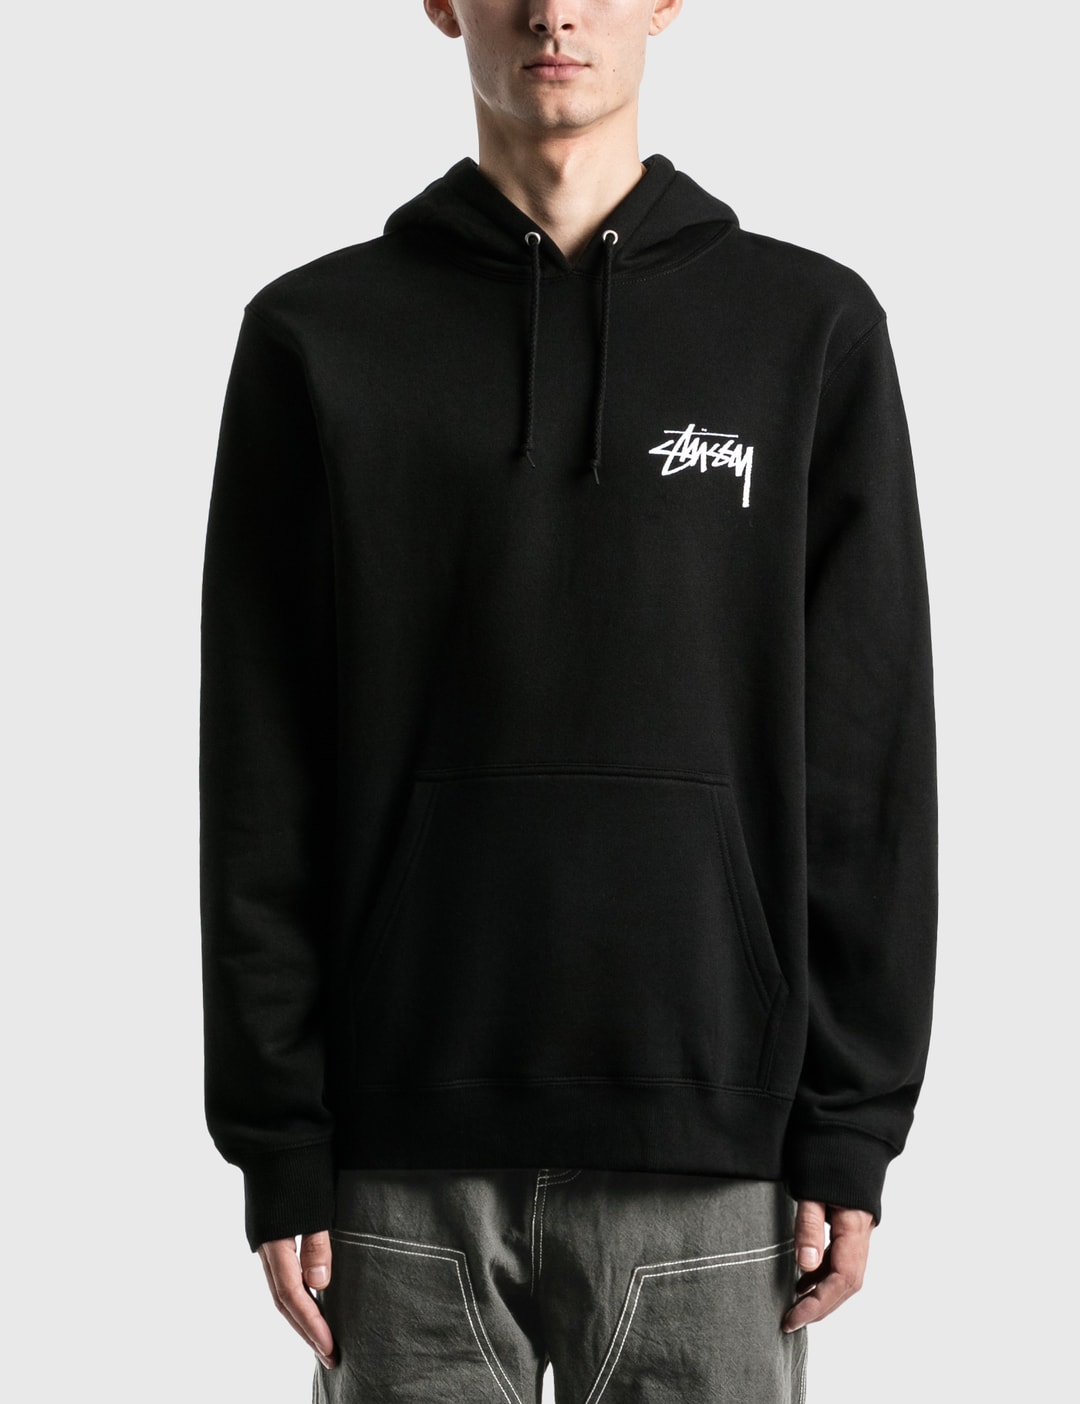 Stüssy - Pair Of Dice Hoodie | HBX - Globally Curated Fashion and ...